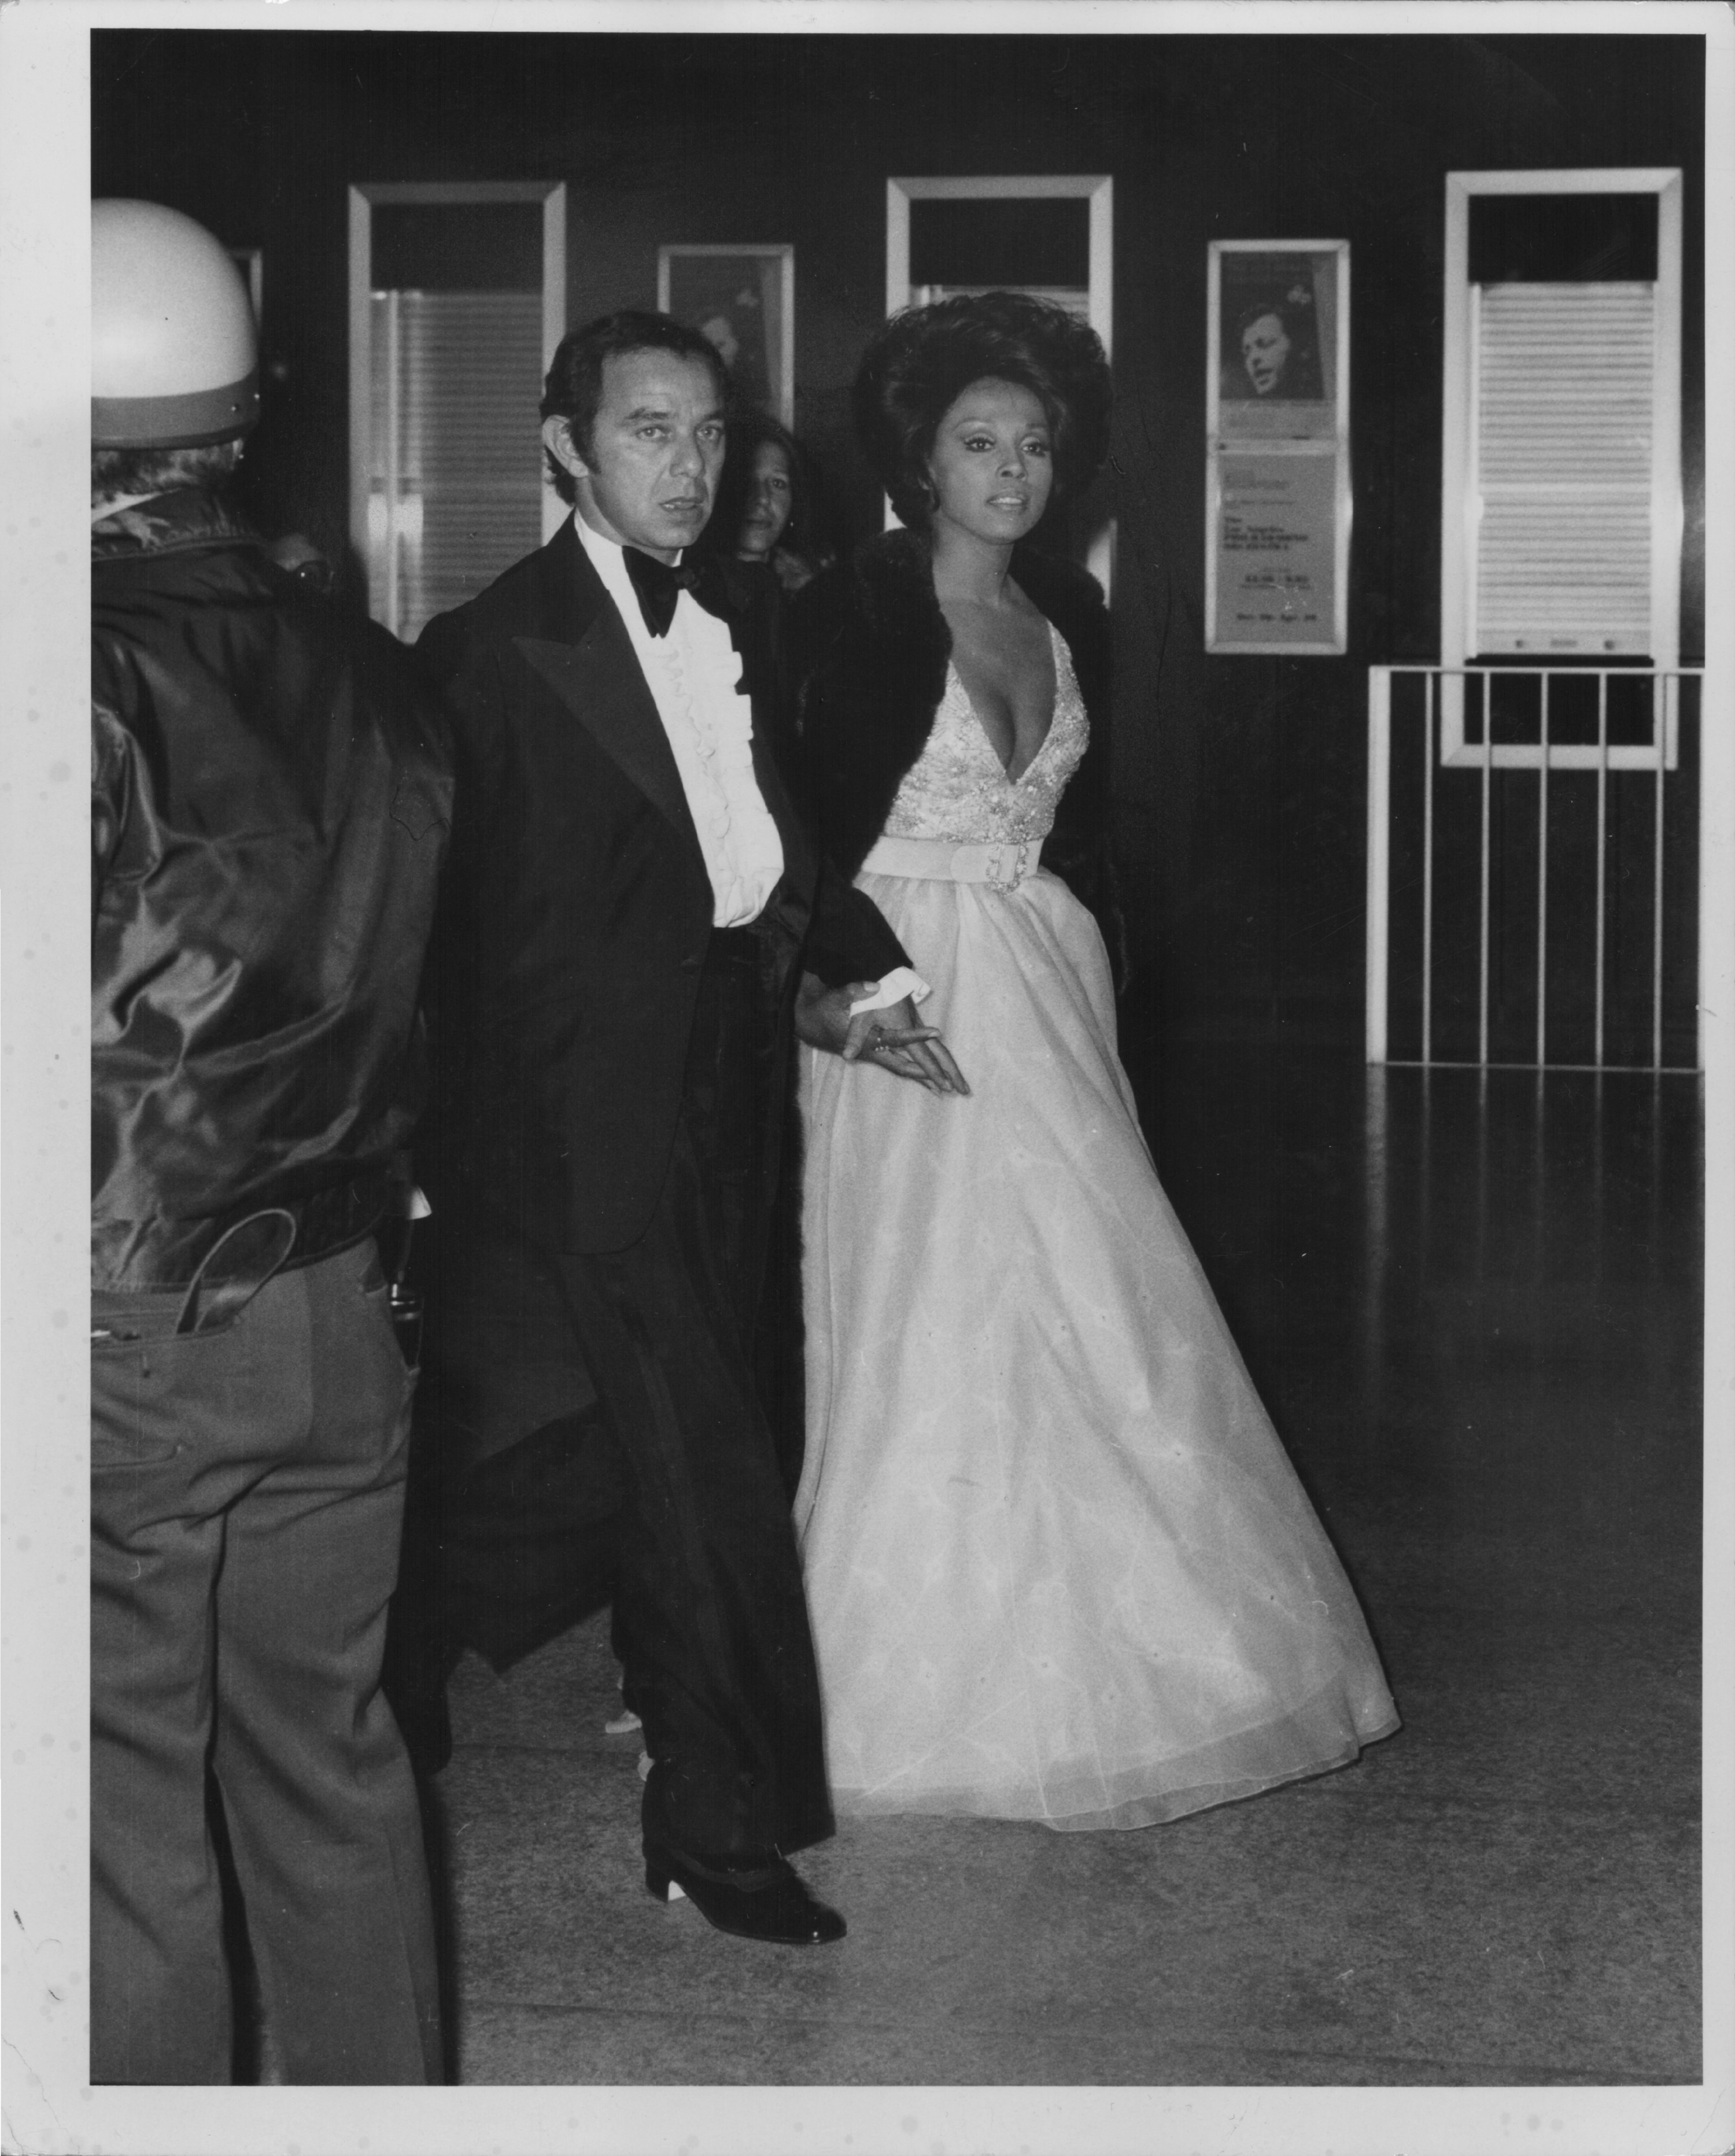 Diahann Carroll and her husband Frederick Glusman arriving at Academy Awards in 1973